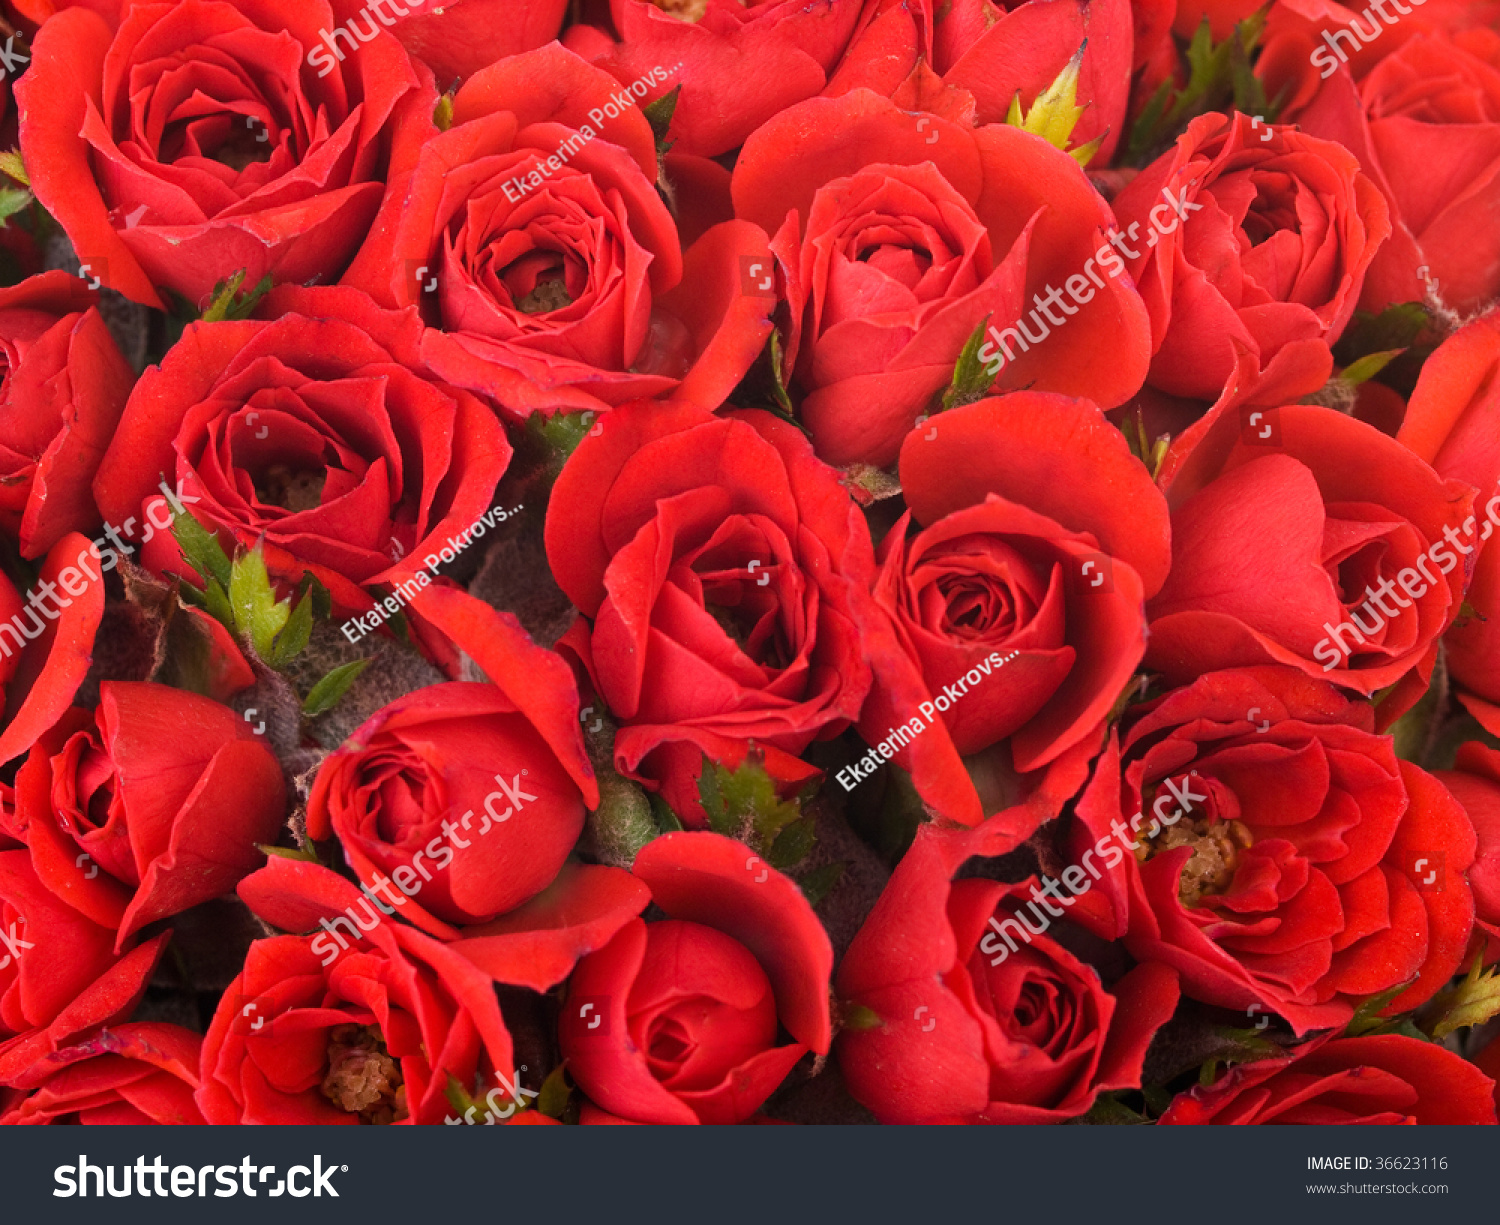 Background Of A Lot Of Small Red Roses Stock Photo 36623116 : Shutterstock